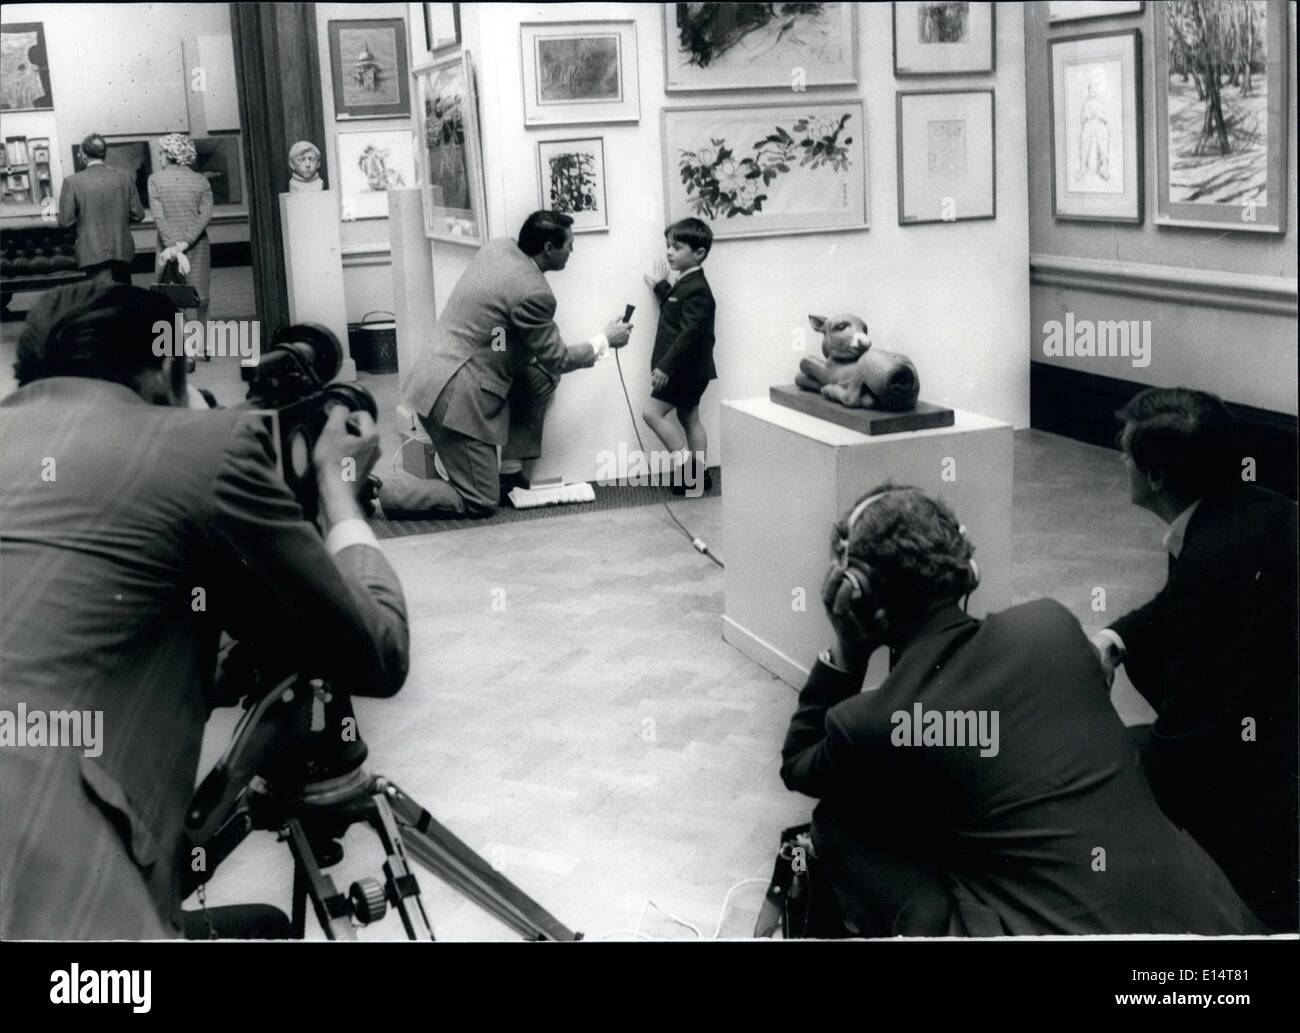 Apr. 18, 2012 - Little five-year old Lewis Lyons, stands by his painting as he faces the cine camera - at the Royal Academy today. Stock Photo